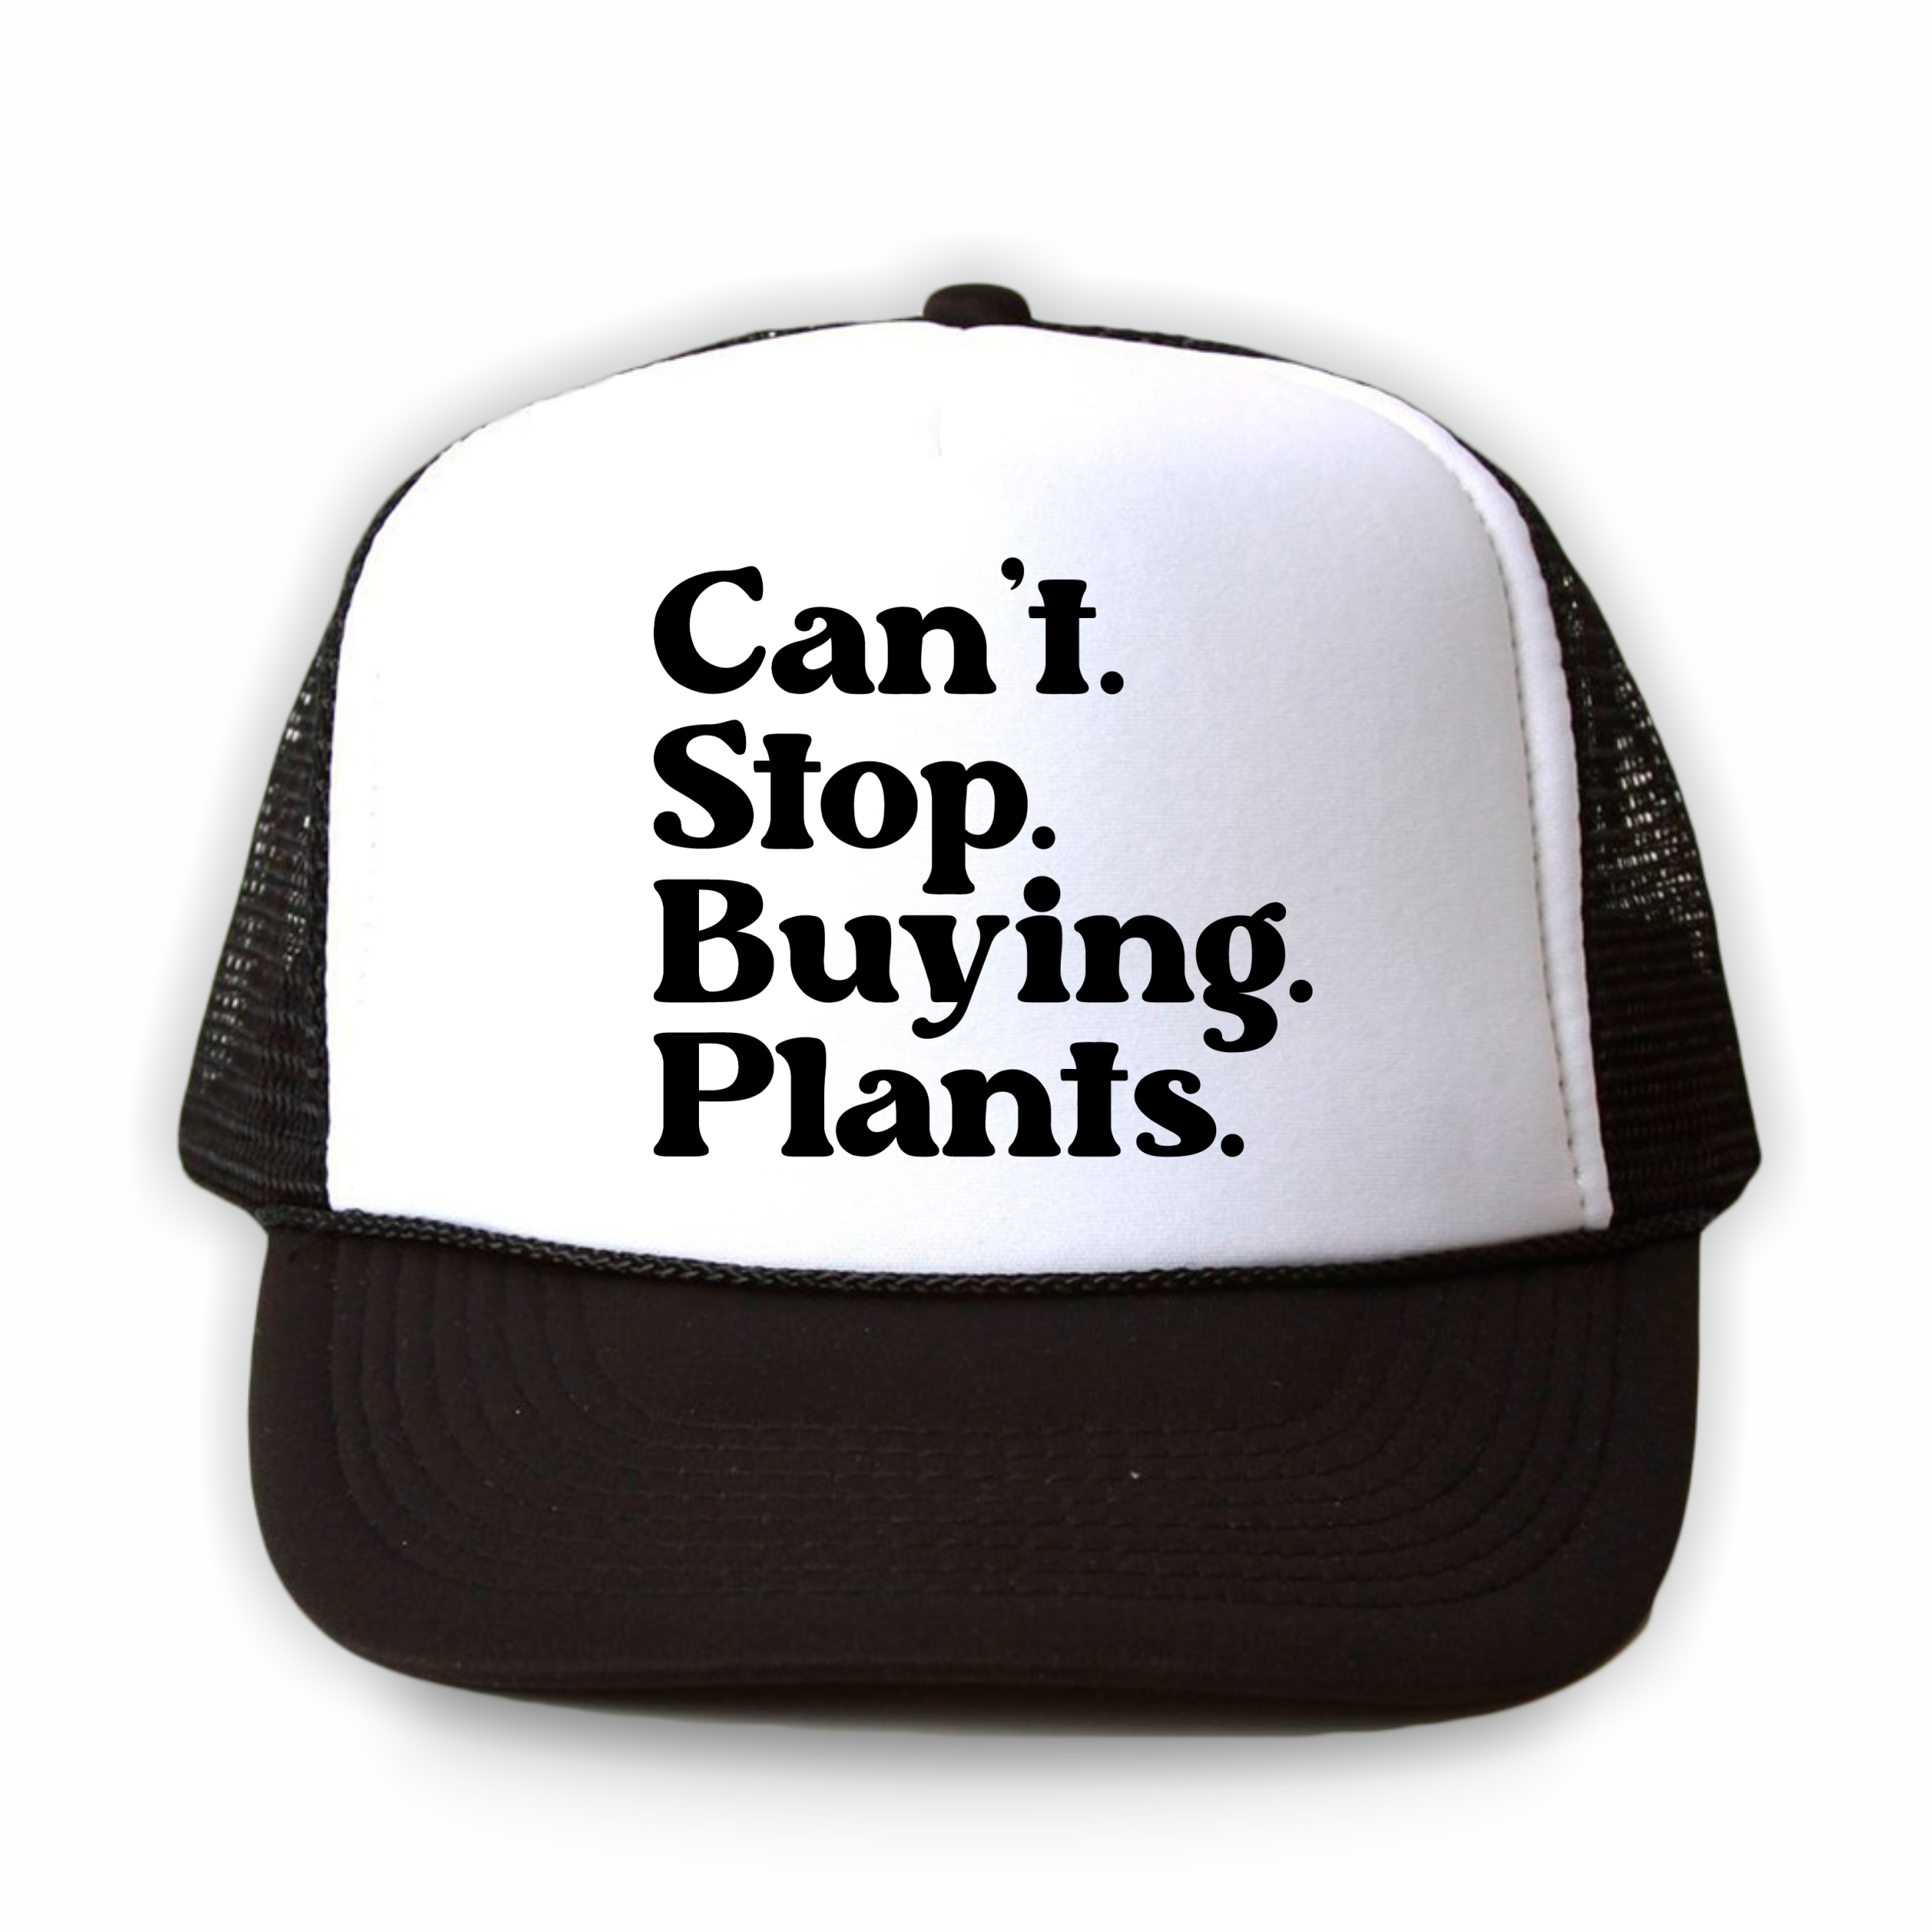 Can't Stop Buying Plants SVG sublimated onto a trucker hat.